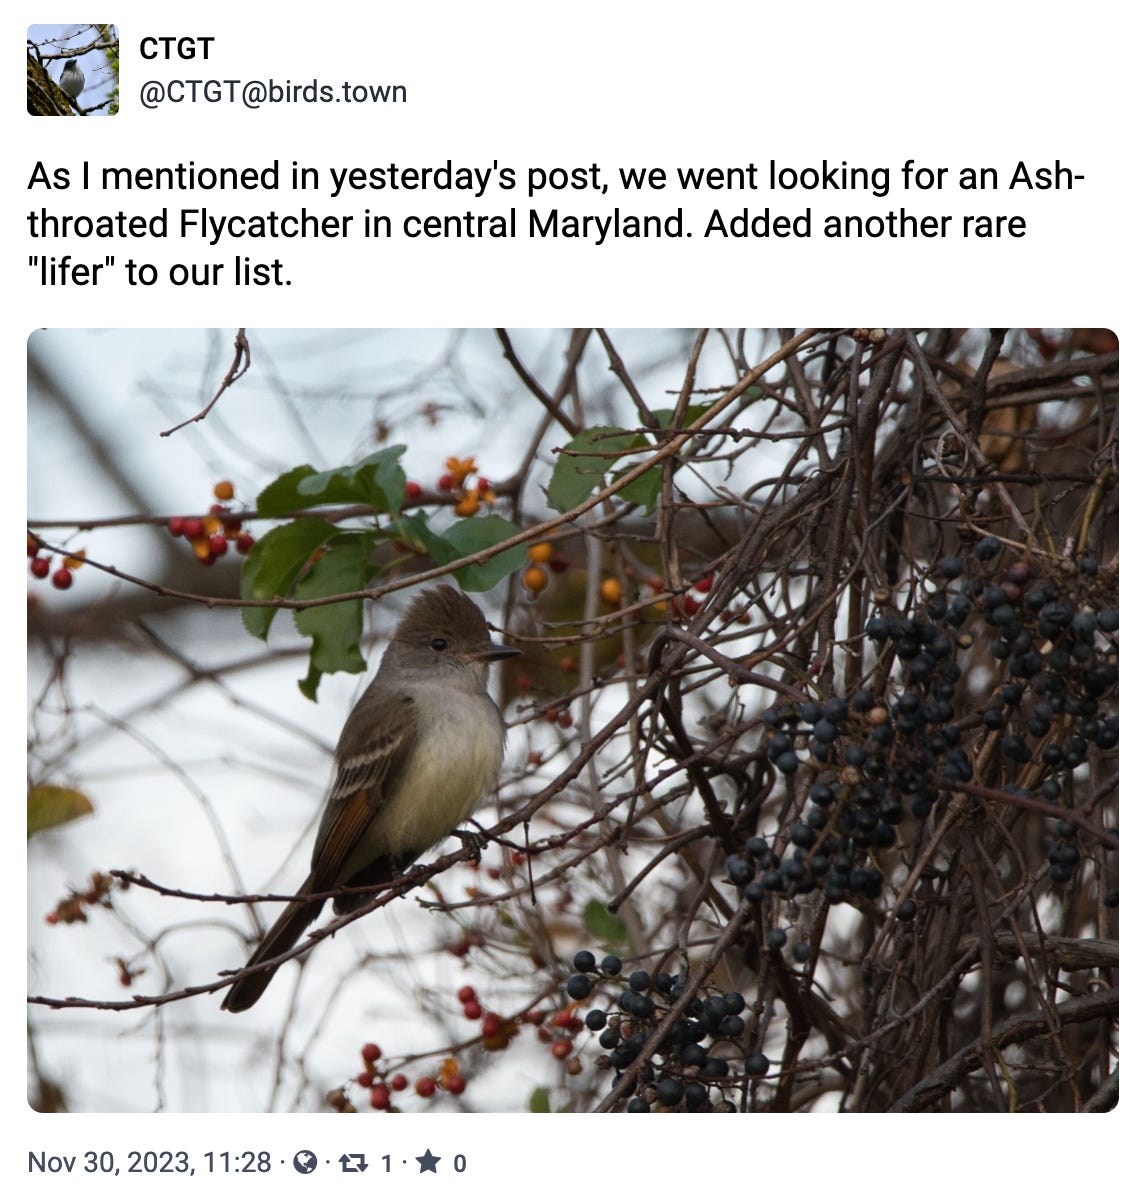 As I mentioned in yesterday's post, we went looking for an Ash-throated Flycatcher in central Maryland. Added another rare "lifer" to our list. 